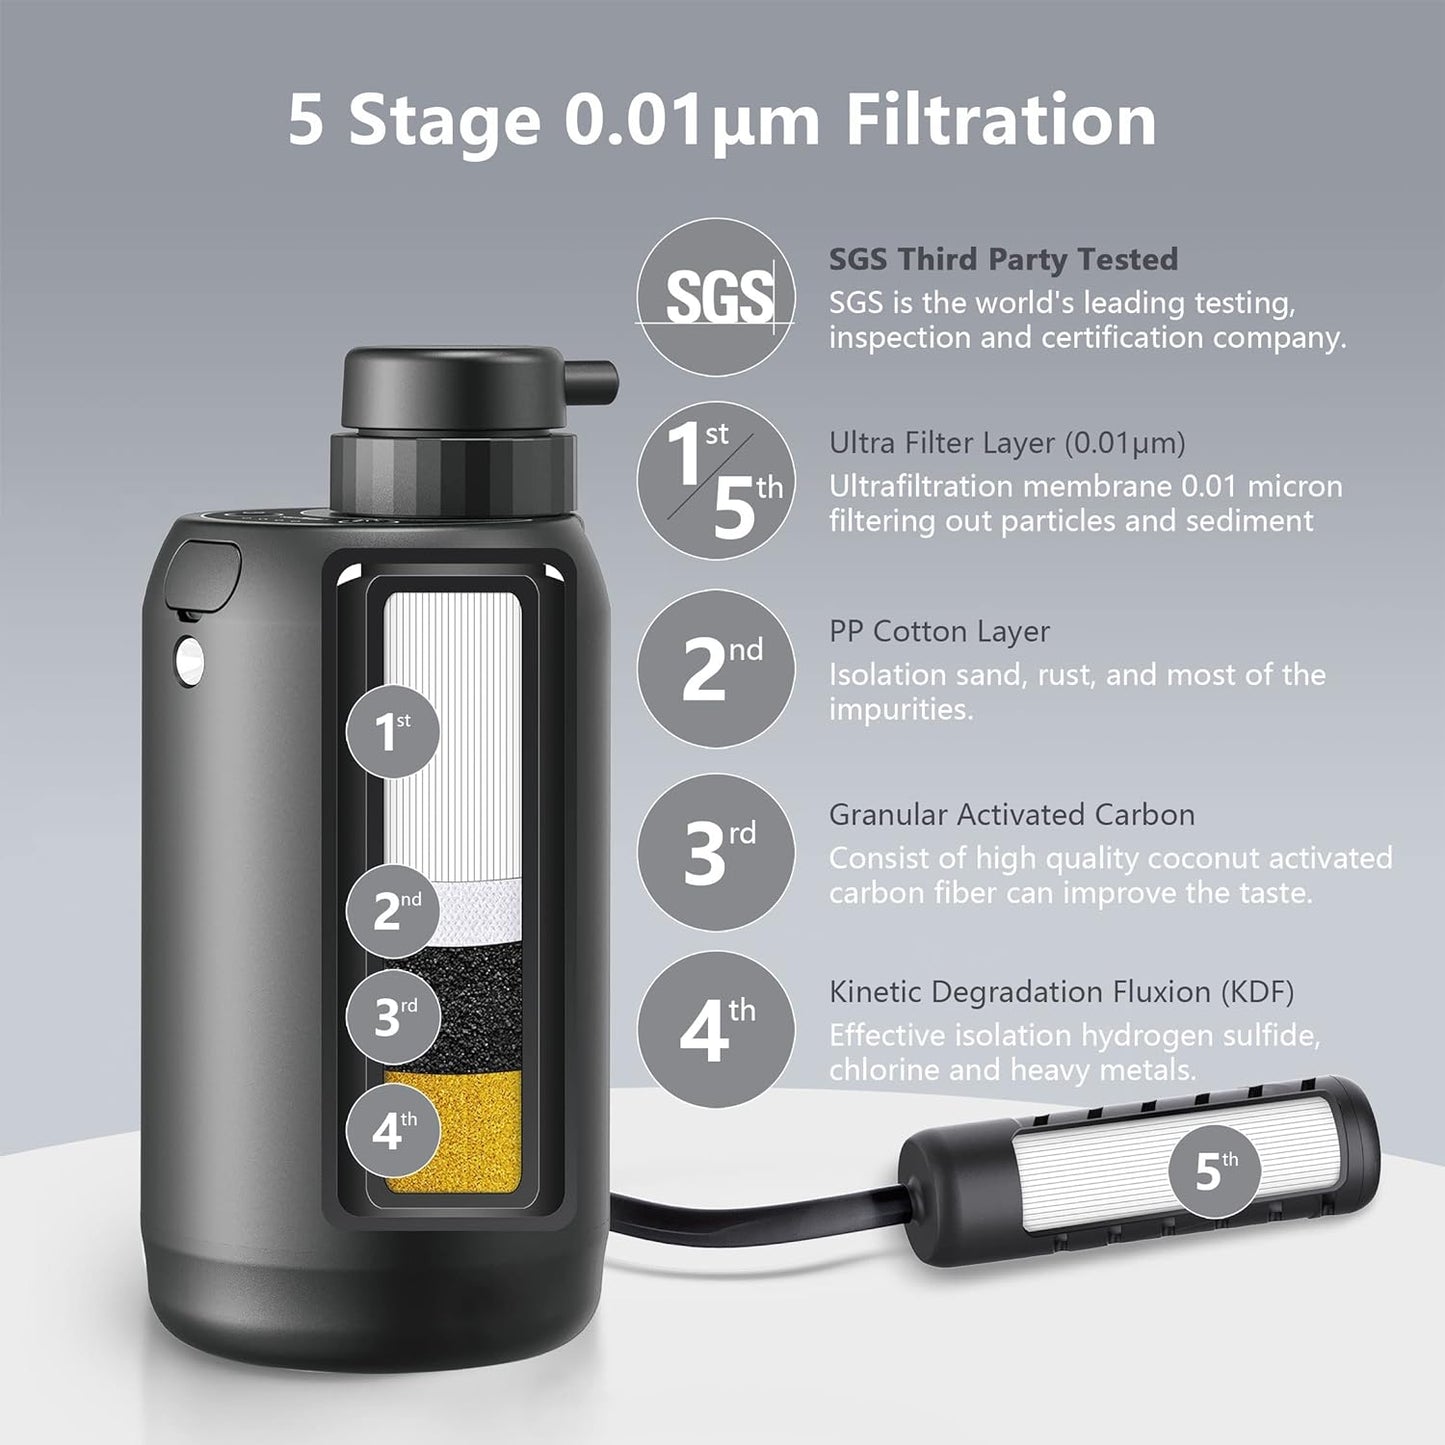 Electric Portable Water Filter - 0.01 Micron 5-Stage Water Purifier Survival with Emergency Lighting Water Purification System for Camping Backpacking Hiking Travel - BK-2000